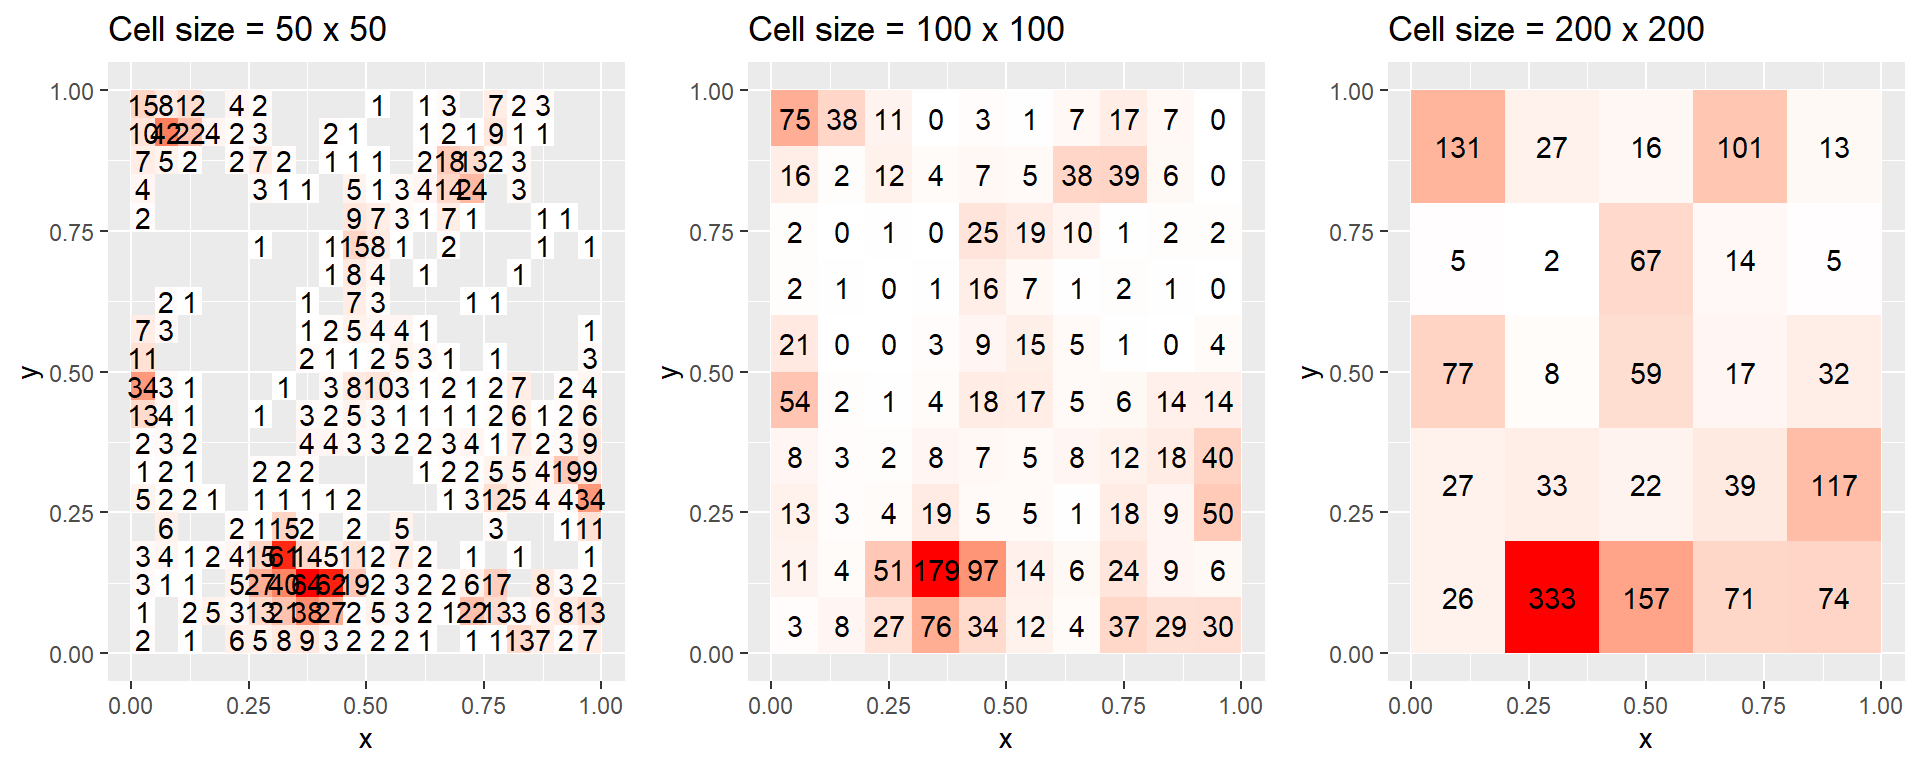 Gridded counts of the simulated locations shown in Figure 3.3a using grid cells of size a) 50 x 50, b) 100 x 100, and c) 200 x 200. Gray areas in panel (a) represent cells with 0 locations, which are too numerous to annotate. Note that the expected counts and the probability of presence both depend on the size of the grid cell, and the probability of presence approaches 1 as the size of the grid cells increases.